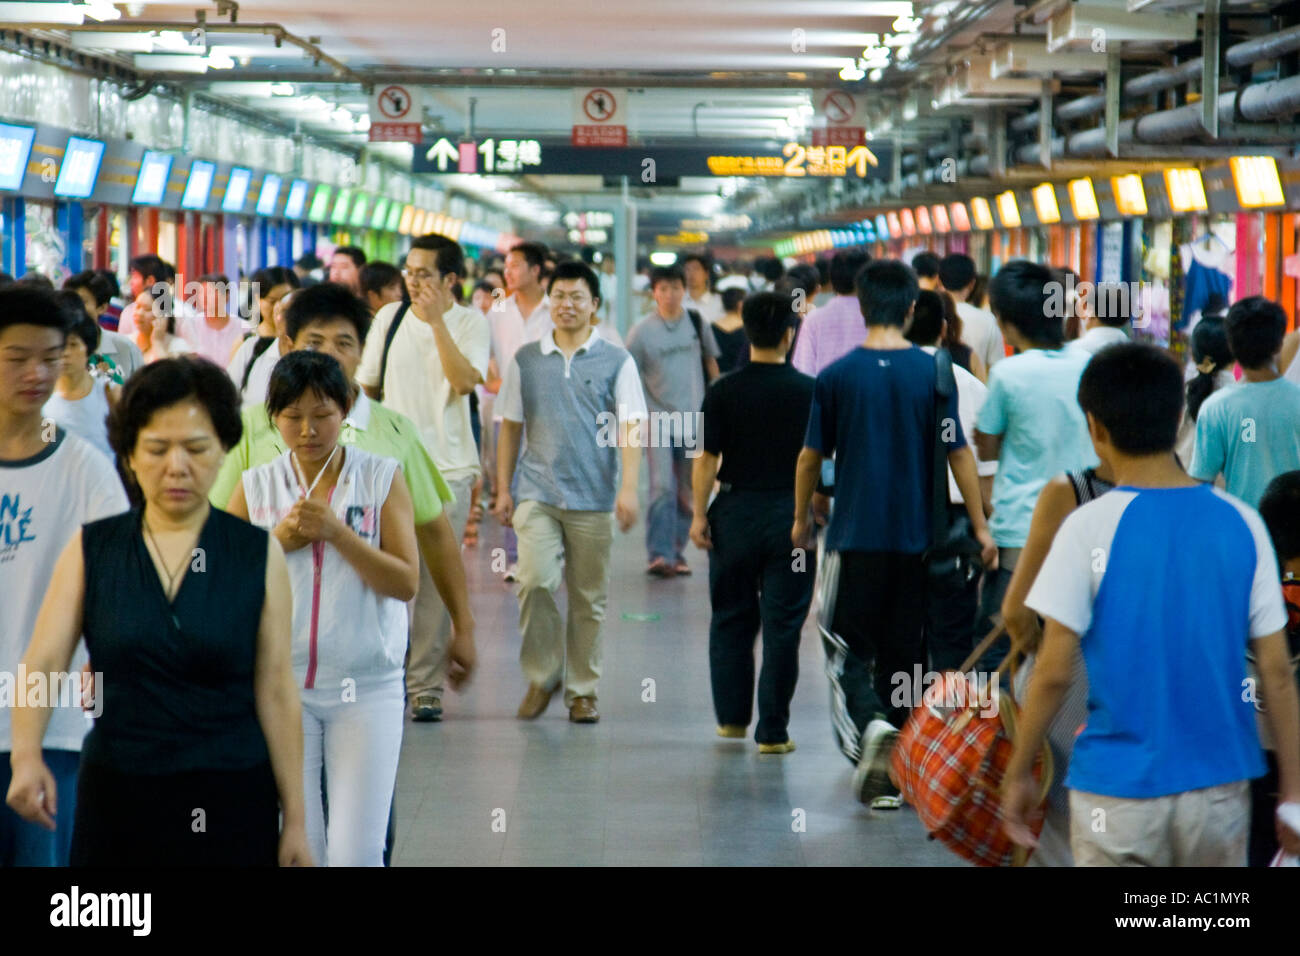 Busy Pedestrian Commercial Shopping Area in Shanghai Metro Station Shanghai China Stock Photo